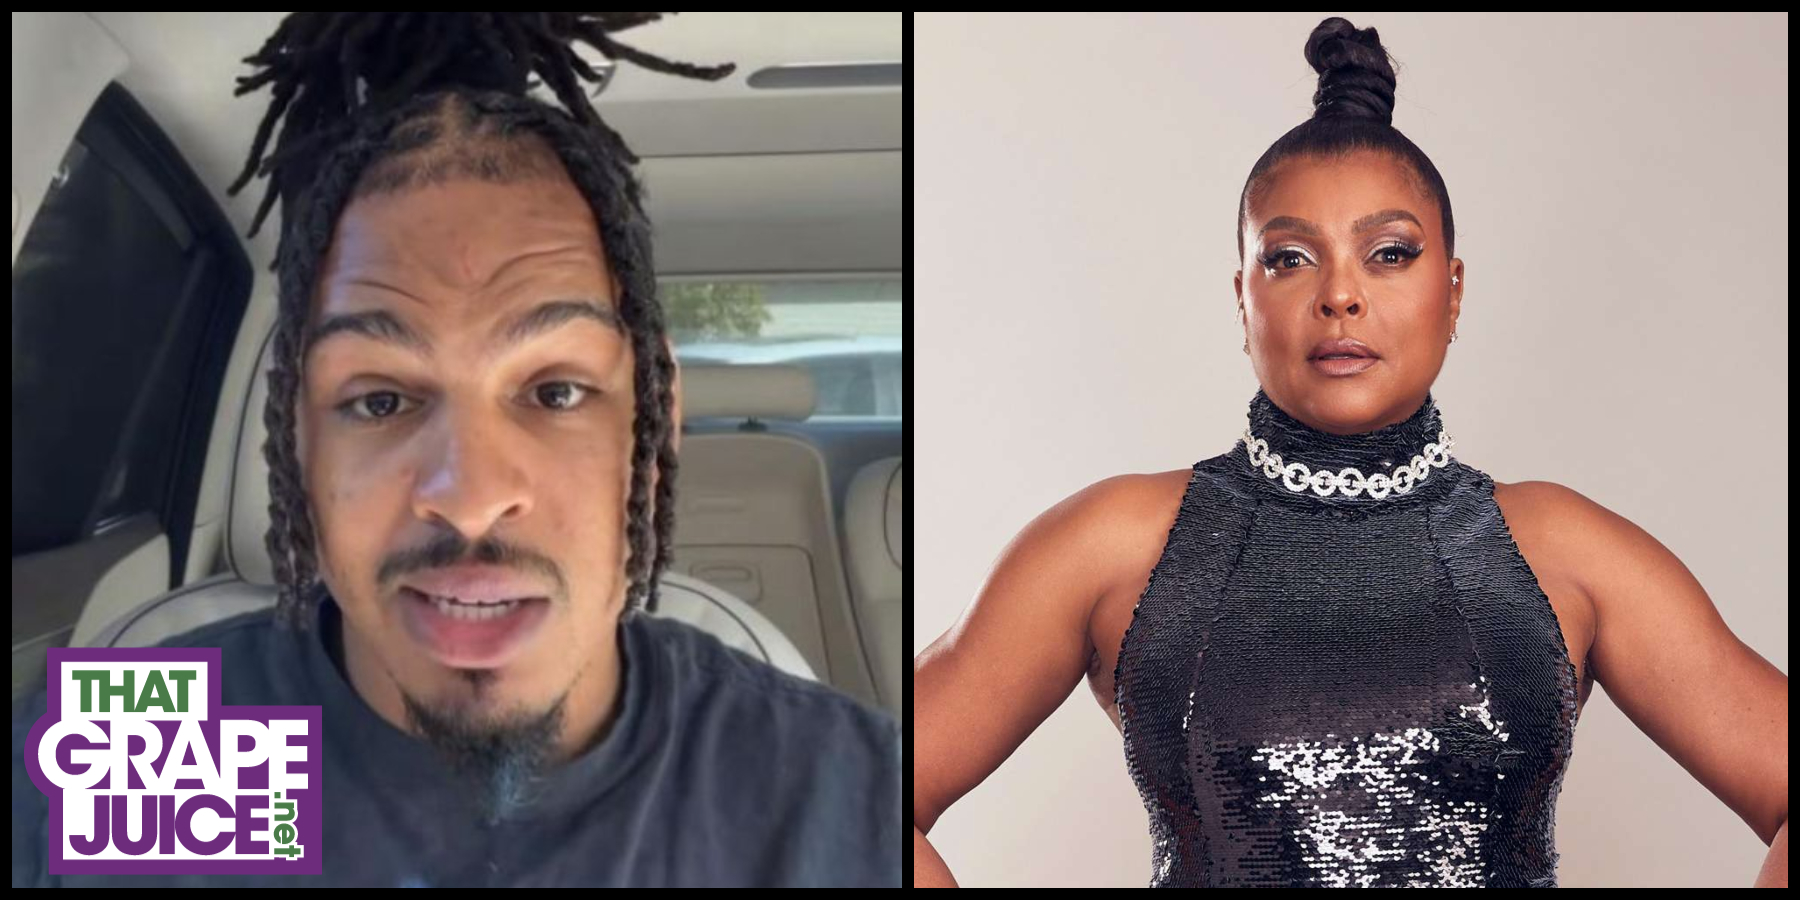 Taraji P. Henson Responds to Criticism Over Perceived Keith Lee Diss at the BET Awards: “He Missed His Moment…His Ego Is Hurt”